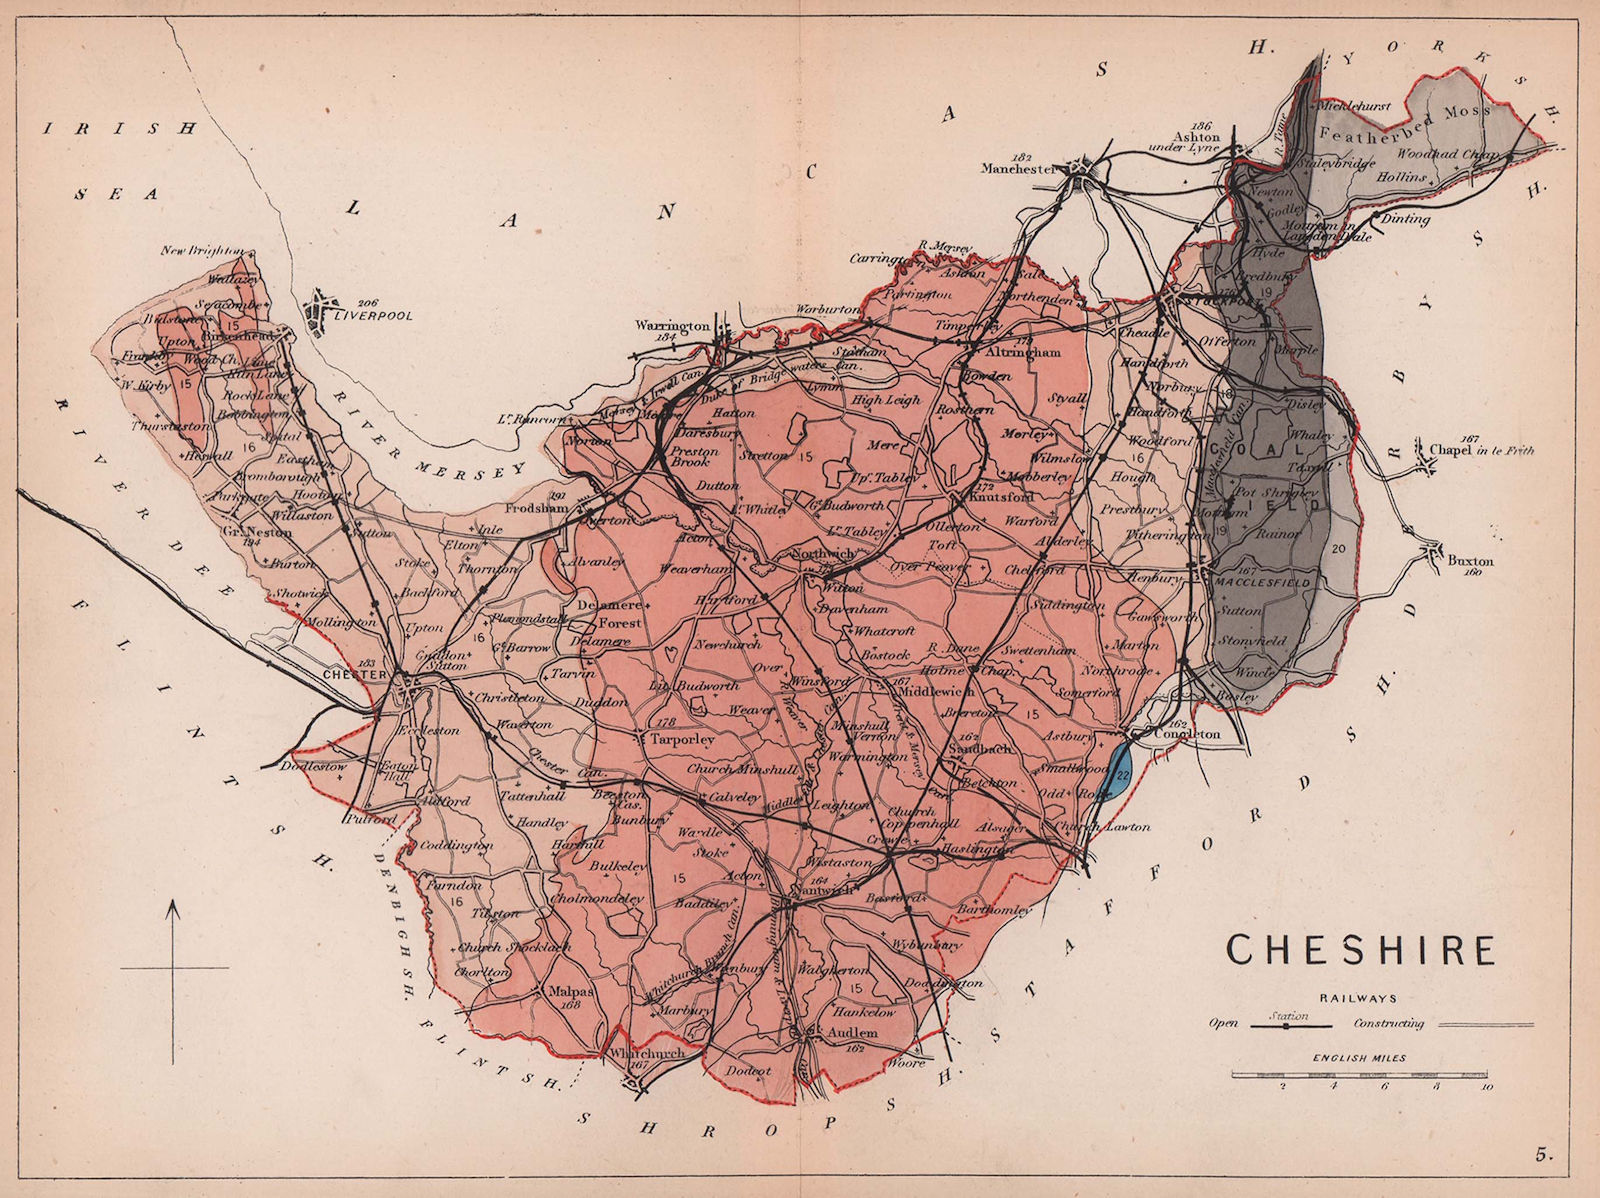 CHESHIRE antique geological county map by James Reynolds 1864